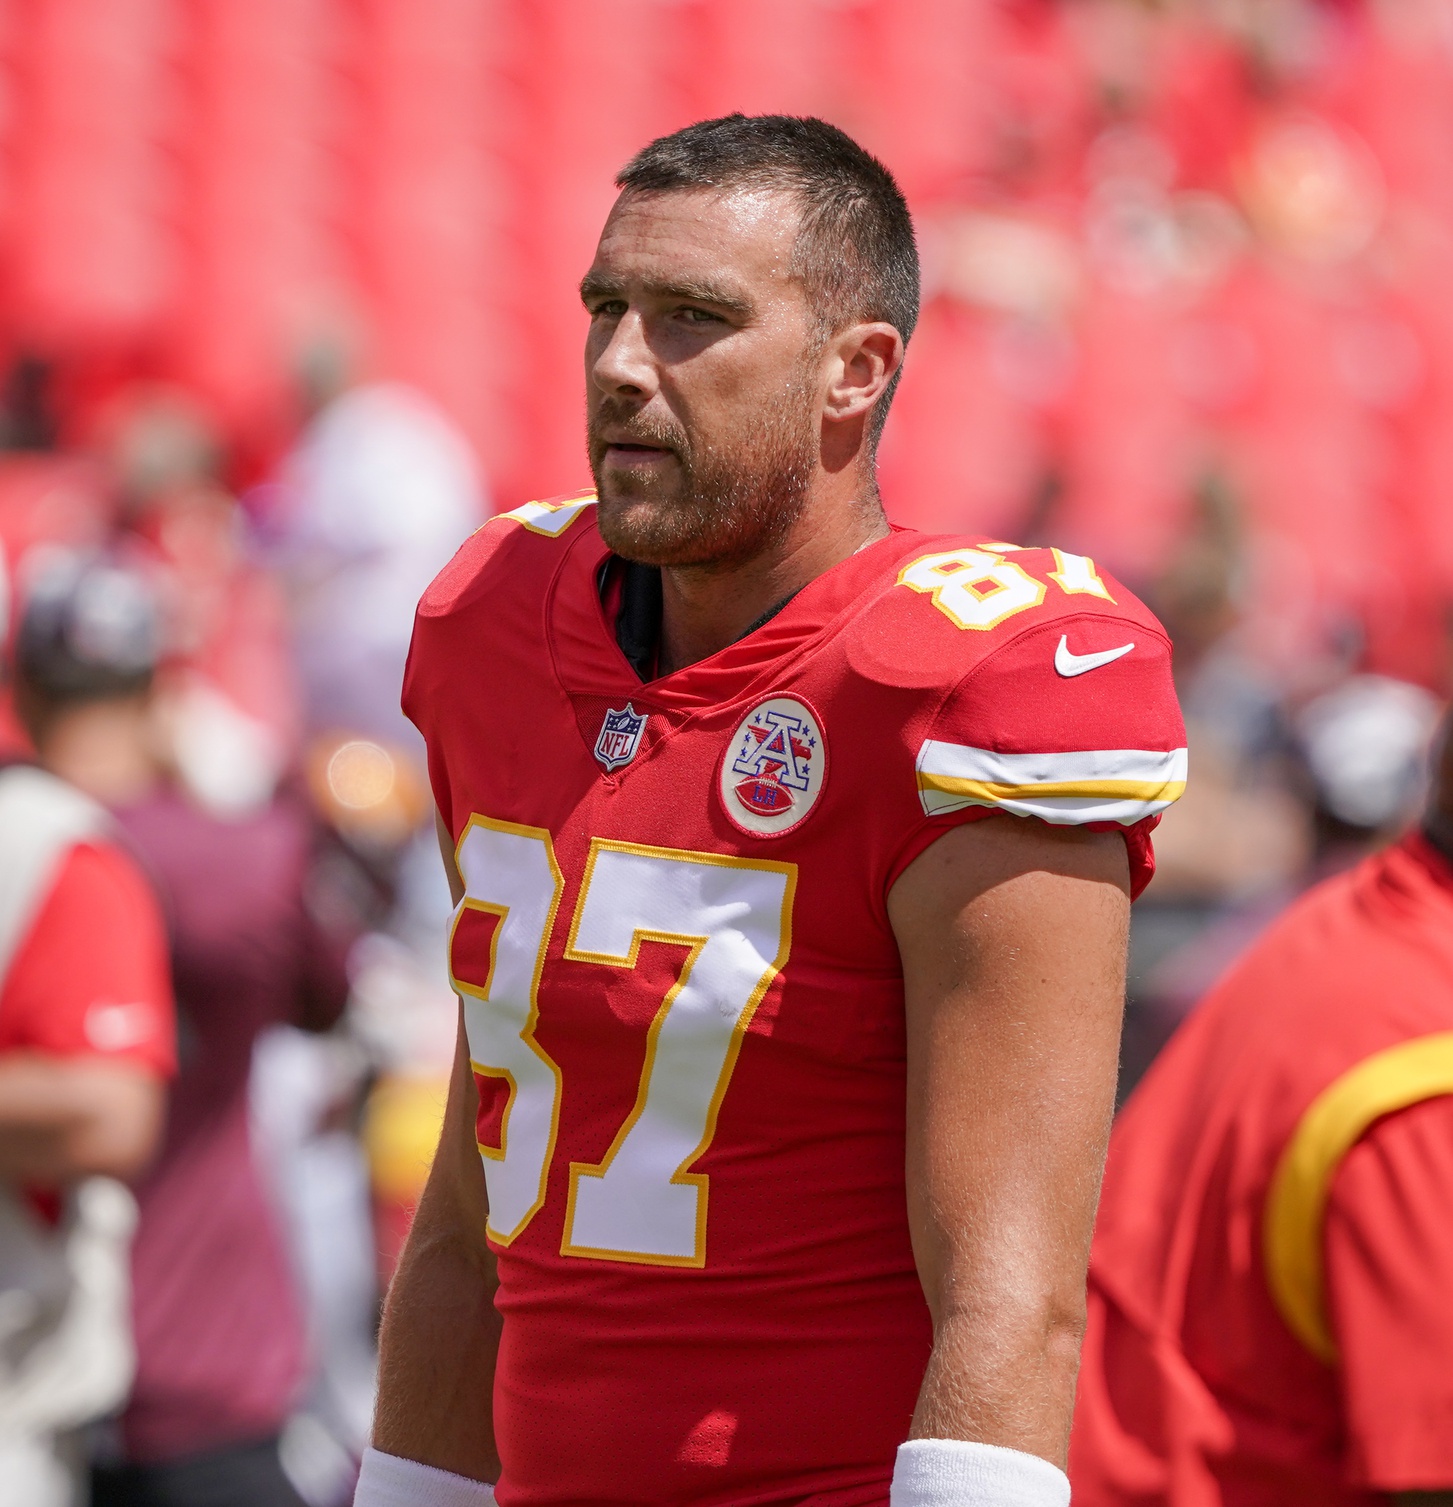 Chargers vs Chiefs Prop Bets for Thursday Night Football